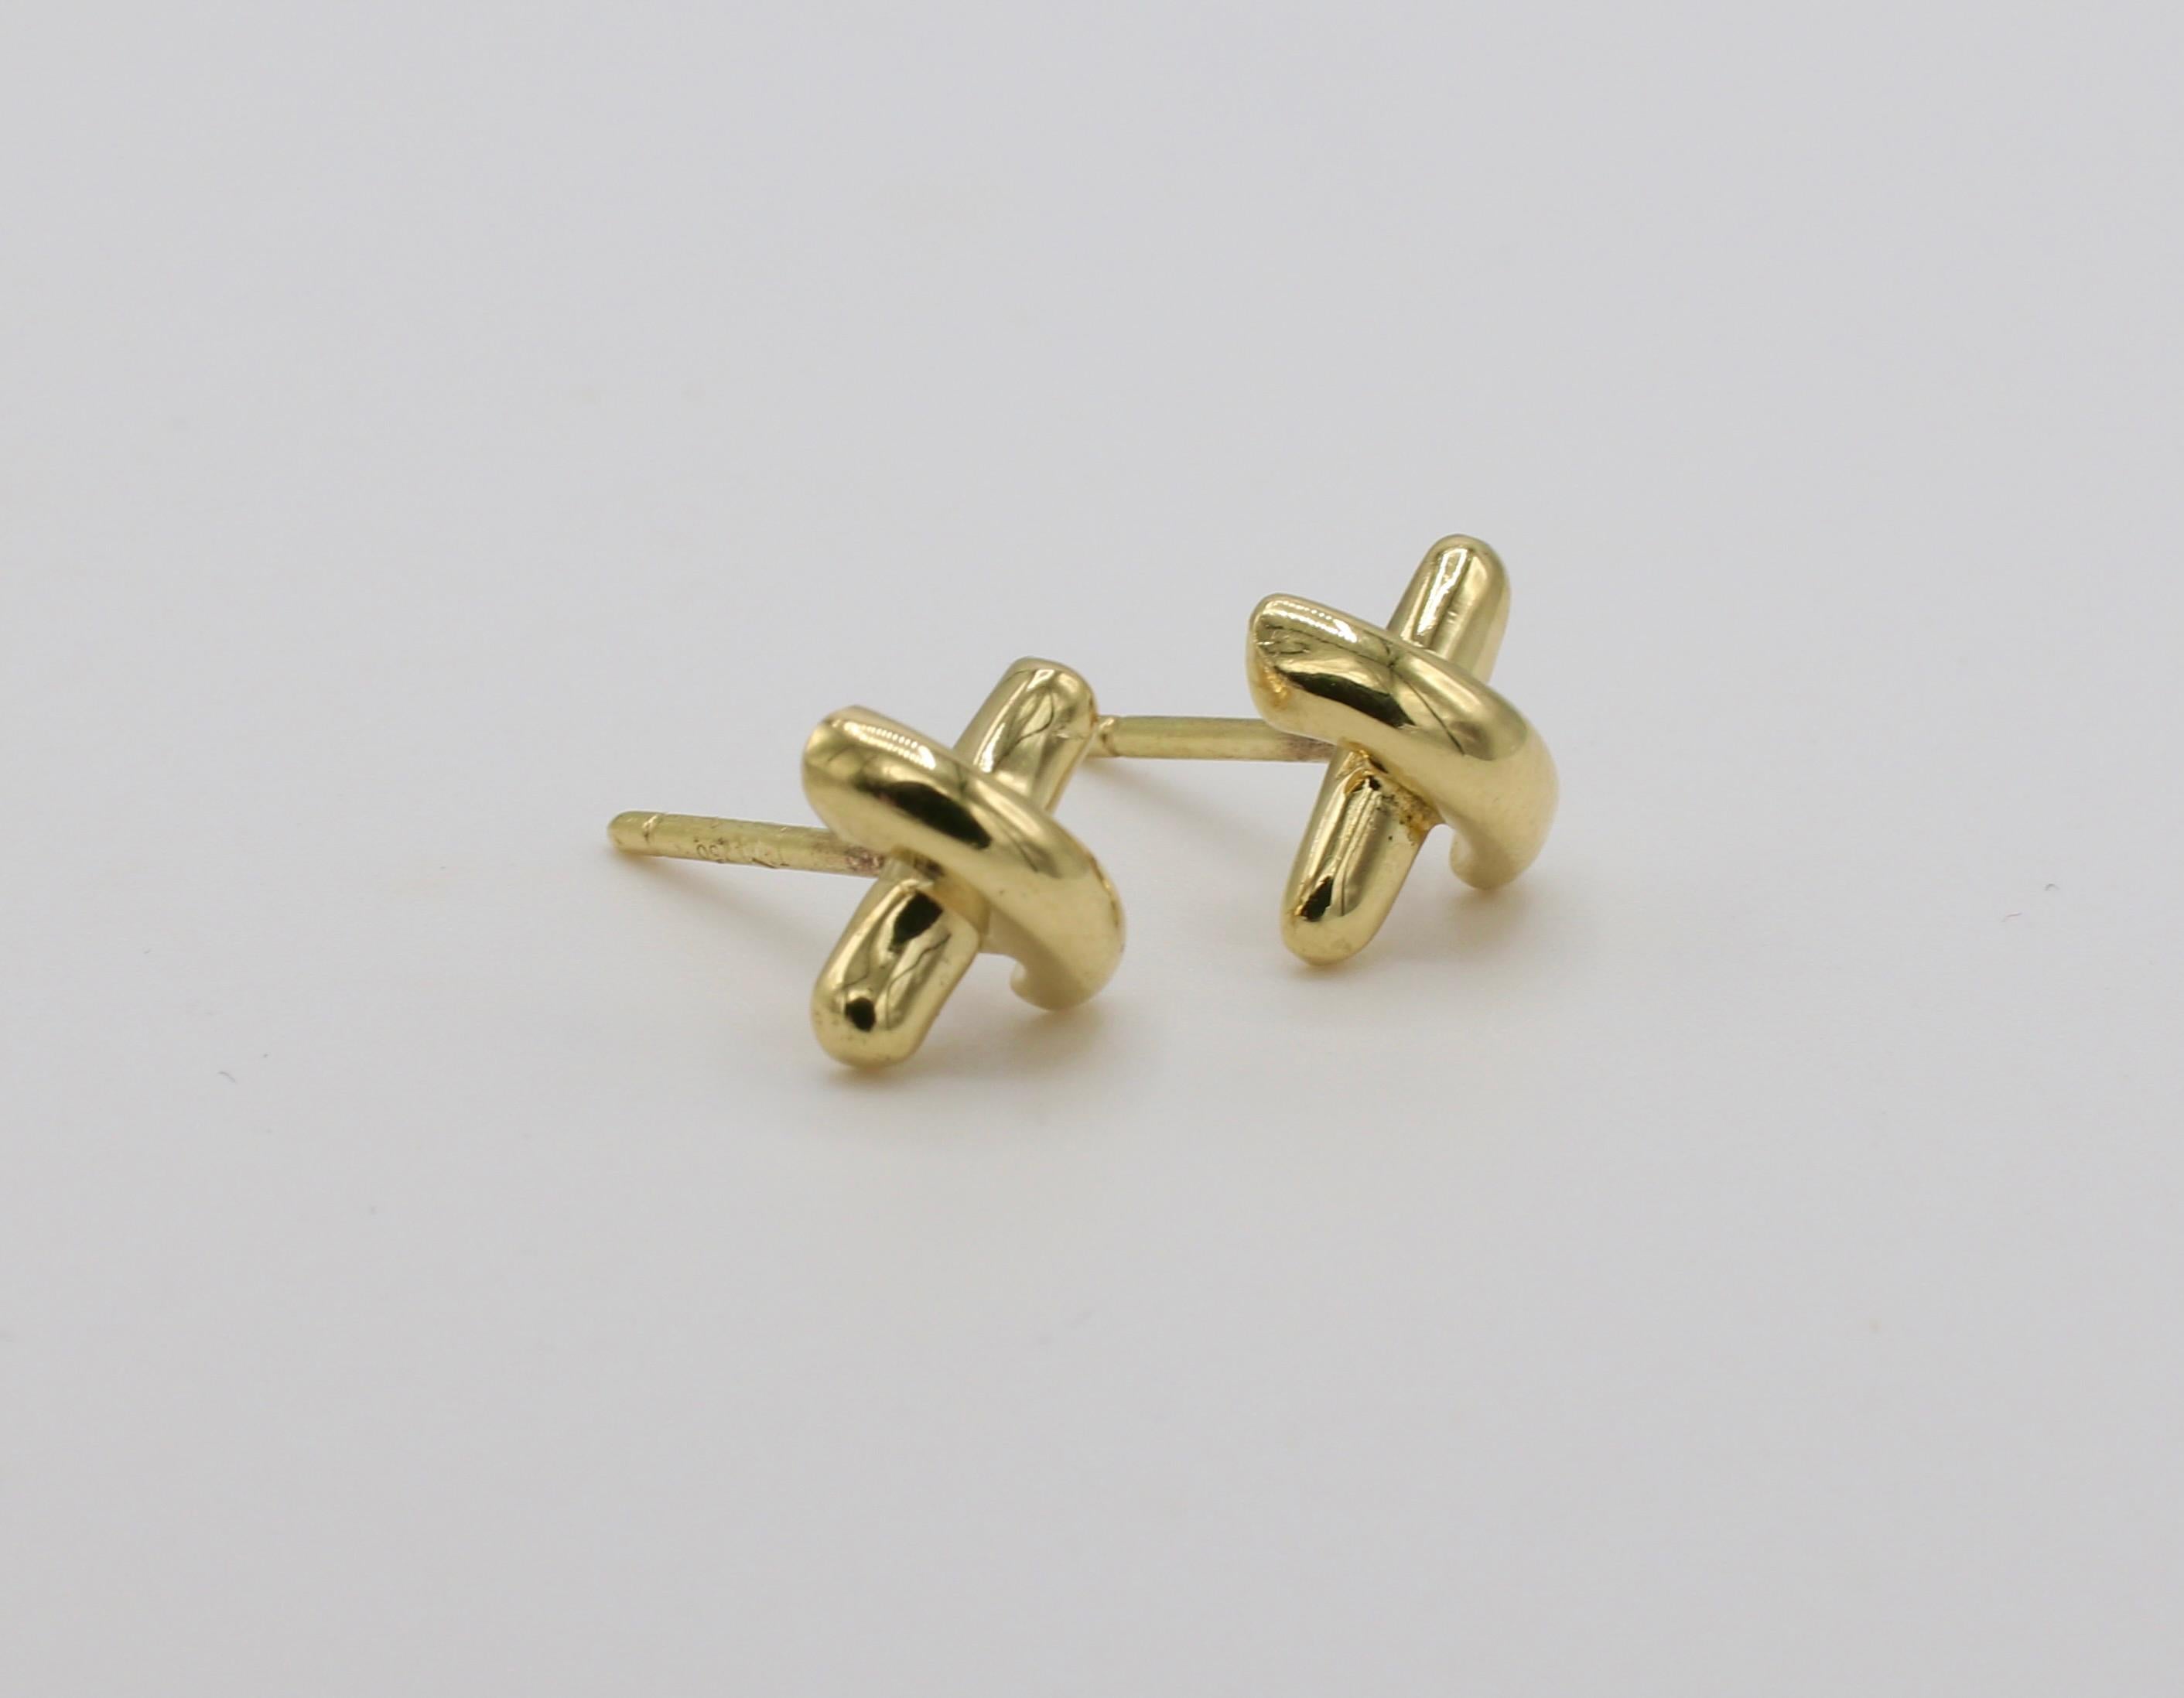 Tiffany & Co. 18 Karat Yellow Gold Kisses X Motif Stud Earrings 
Metal: 18k yellow gold
Weight: 2.17 grams 
Diameter: 7MM
Signed T&Co 750 on back and posts 


